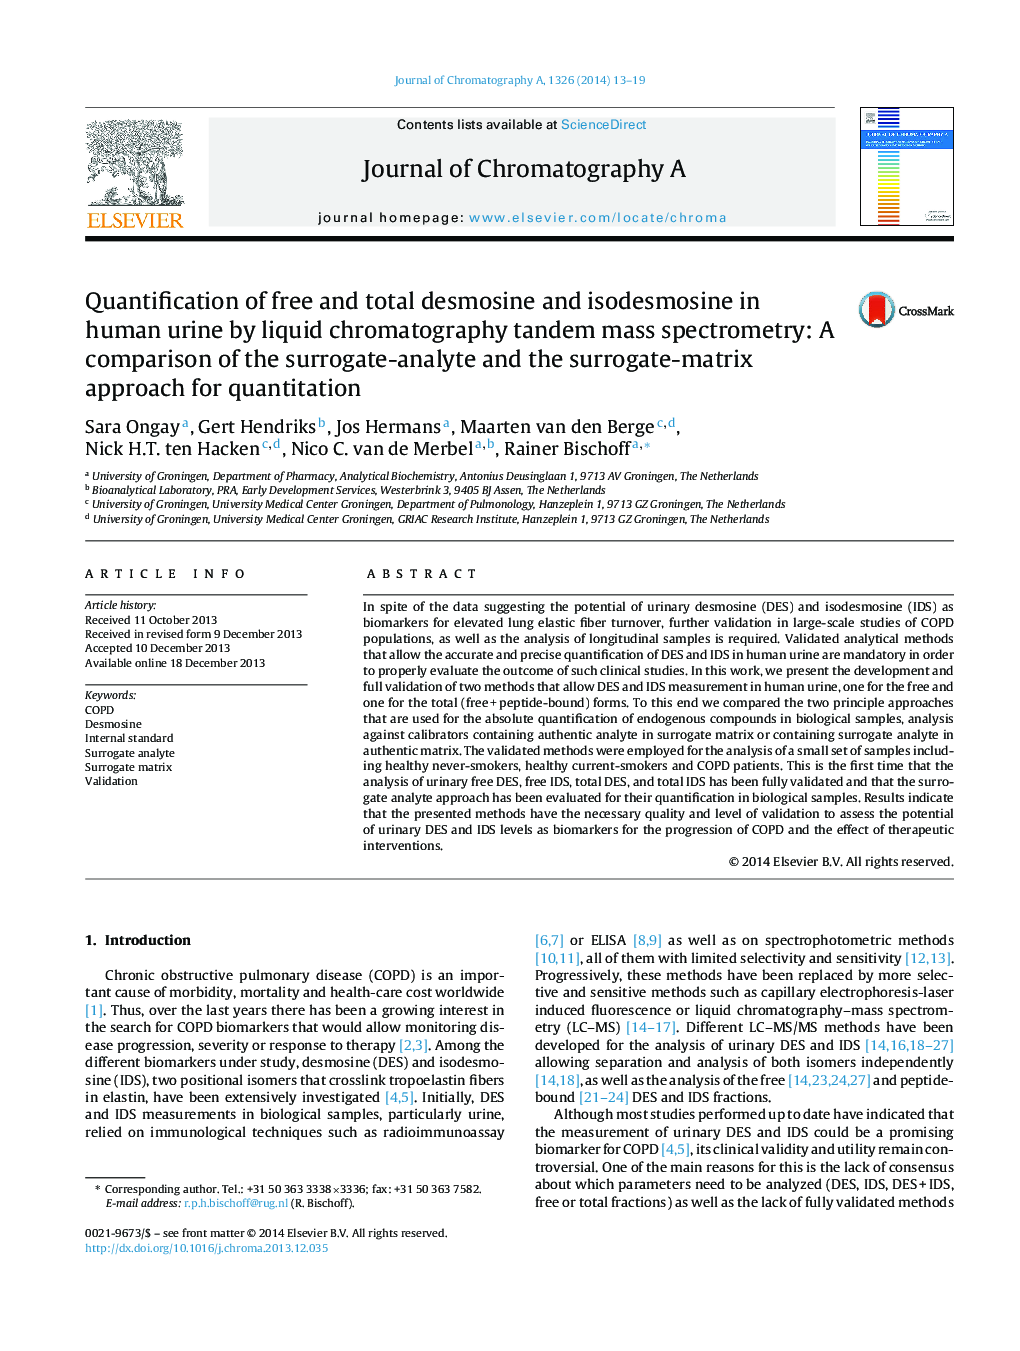 Quantification of free and total desmosine and isodesmosine in human urine by liquid chromatography tandem mass spectrometry: A comparison of the surrogate-analyte and the surrogate-matrix approach for quantitation